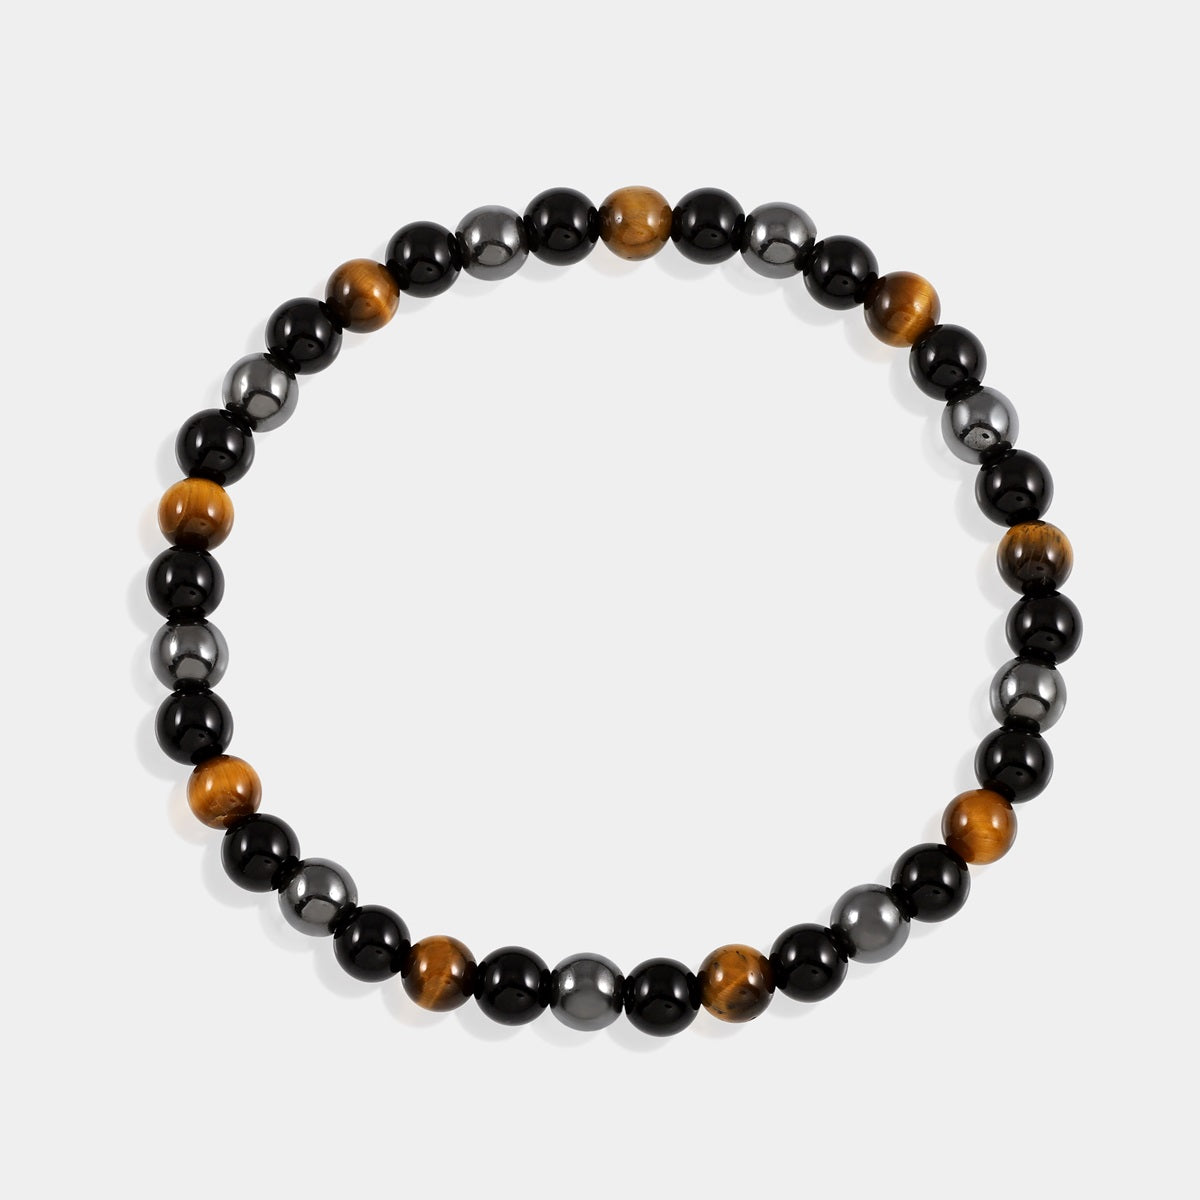 Detailed view of a 6mm and 8mm smooth round Black Onyx bead, representing grounding and protective energies in the Triple Protection Bracelet